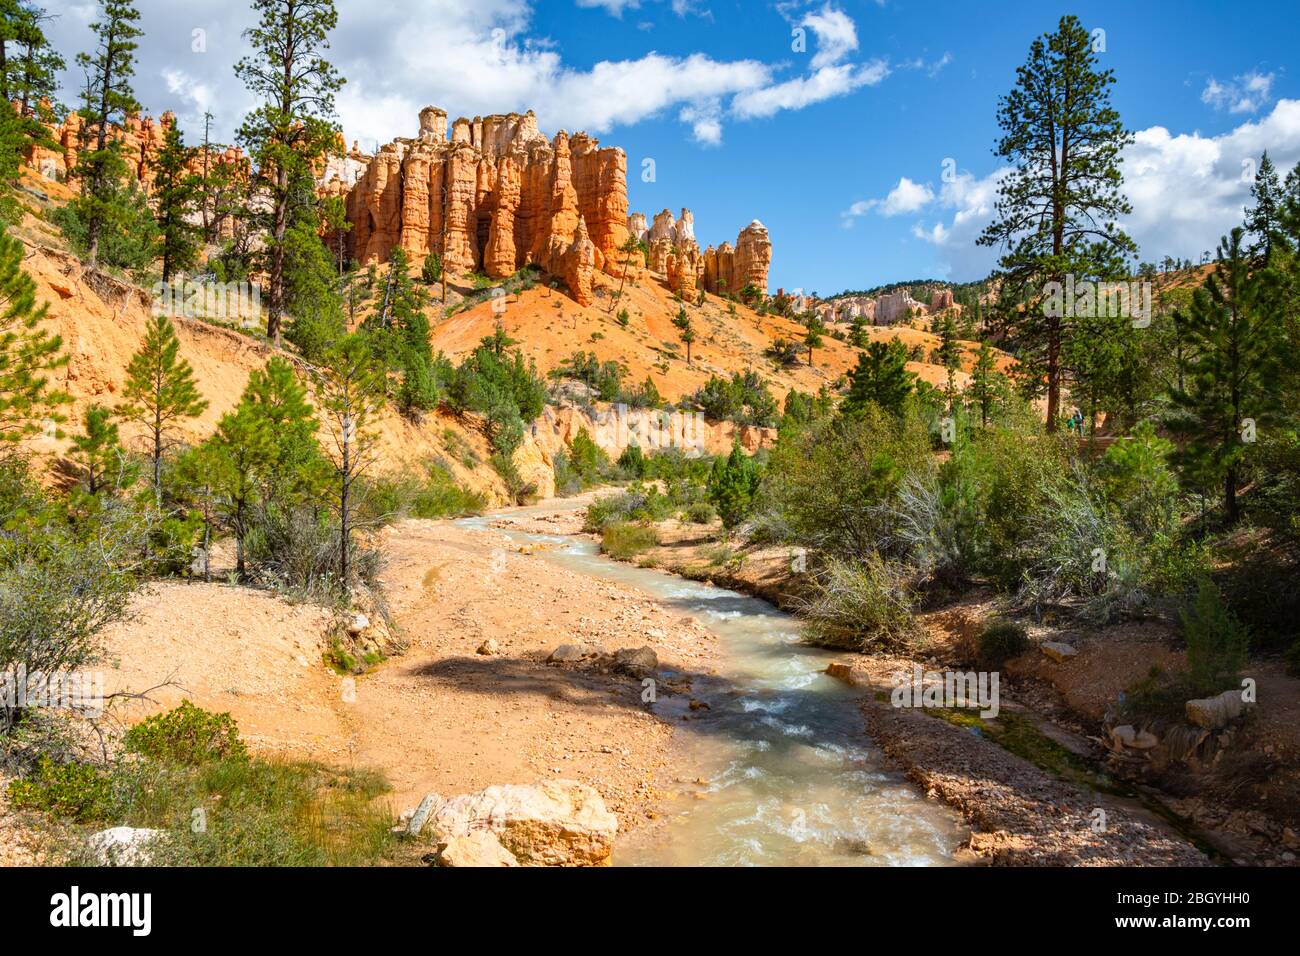 Bryce Canyon National Park Red Sandstone Cliffs & Stream Stock Photo